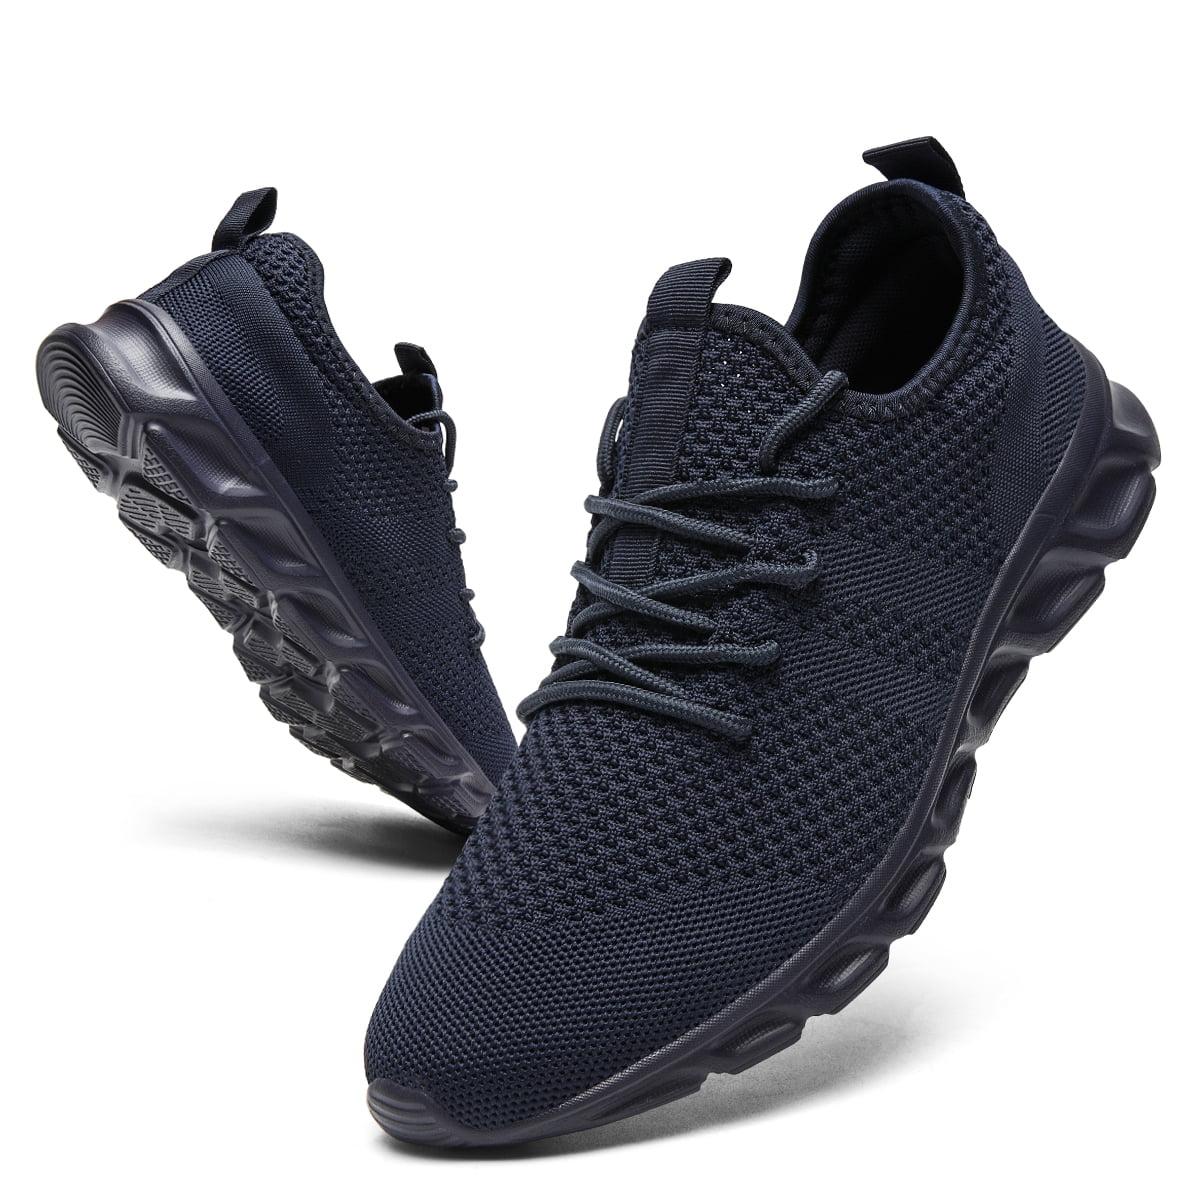 Men's Shoes Outdoor Breathable Sneakers Athletic Casual Running Training Sports 